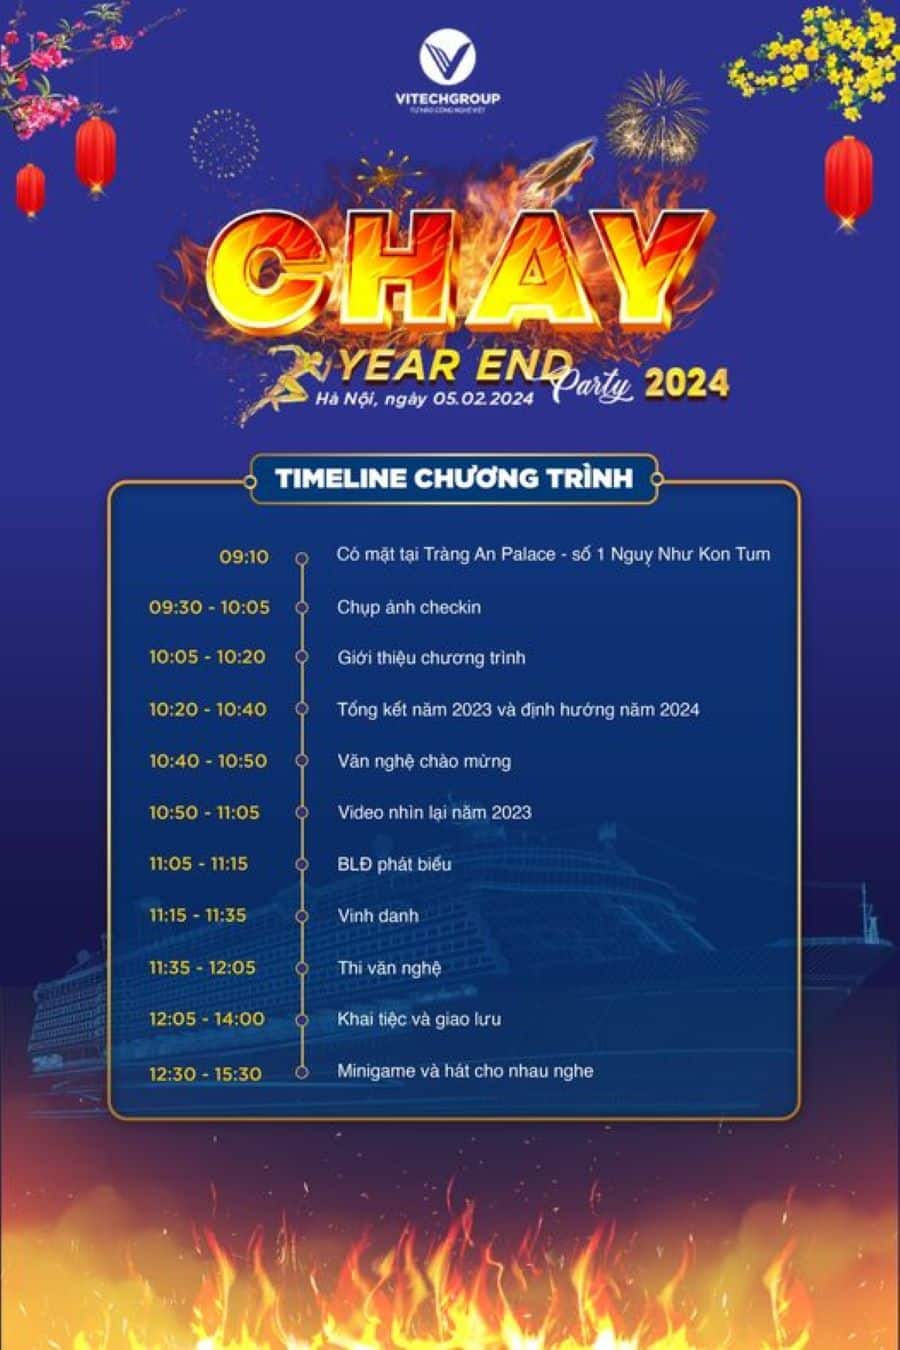 Timeline sự kiện year end party 2023